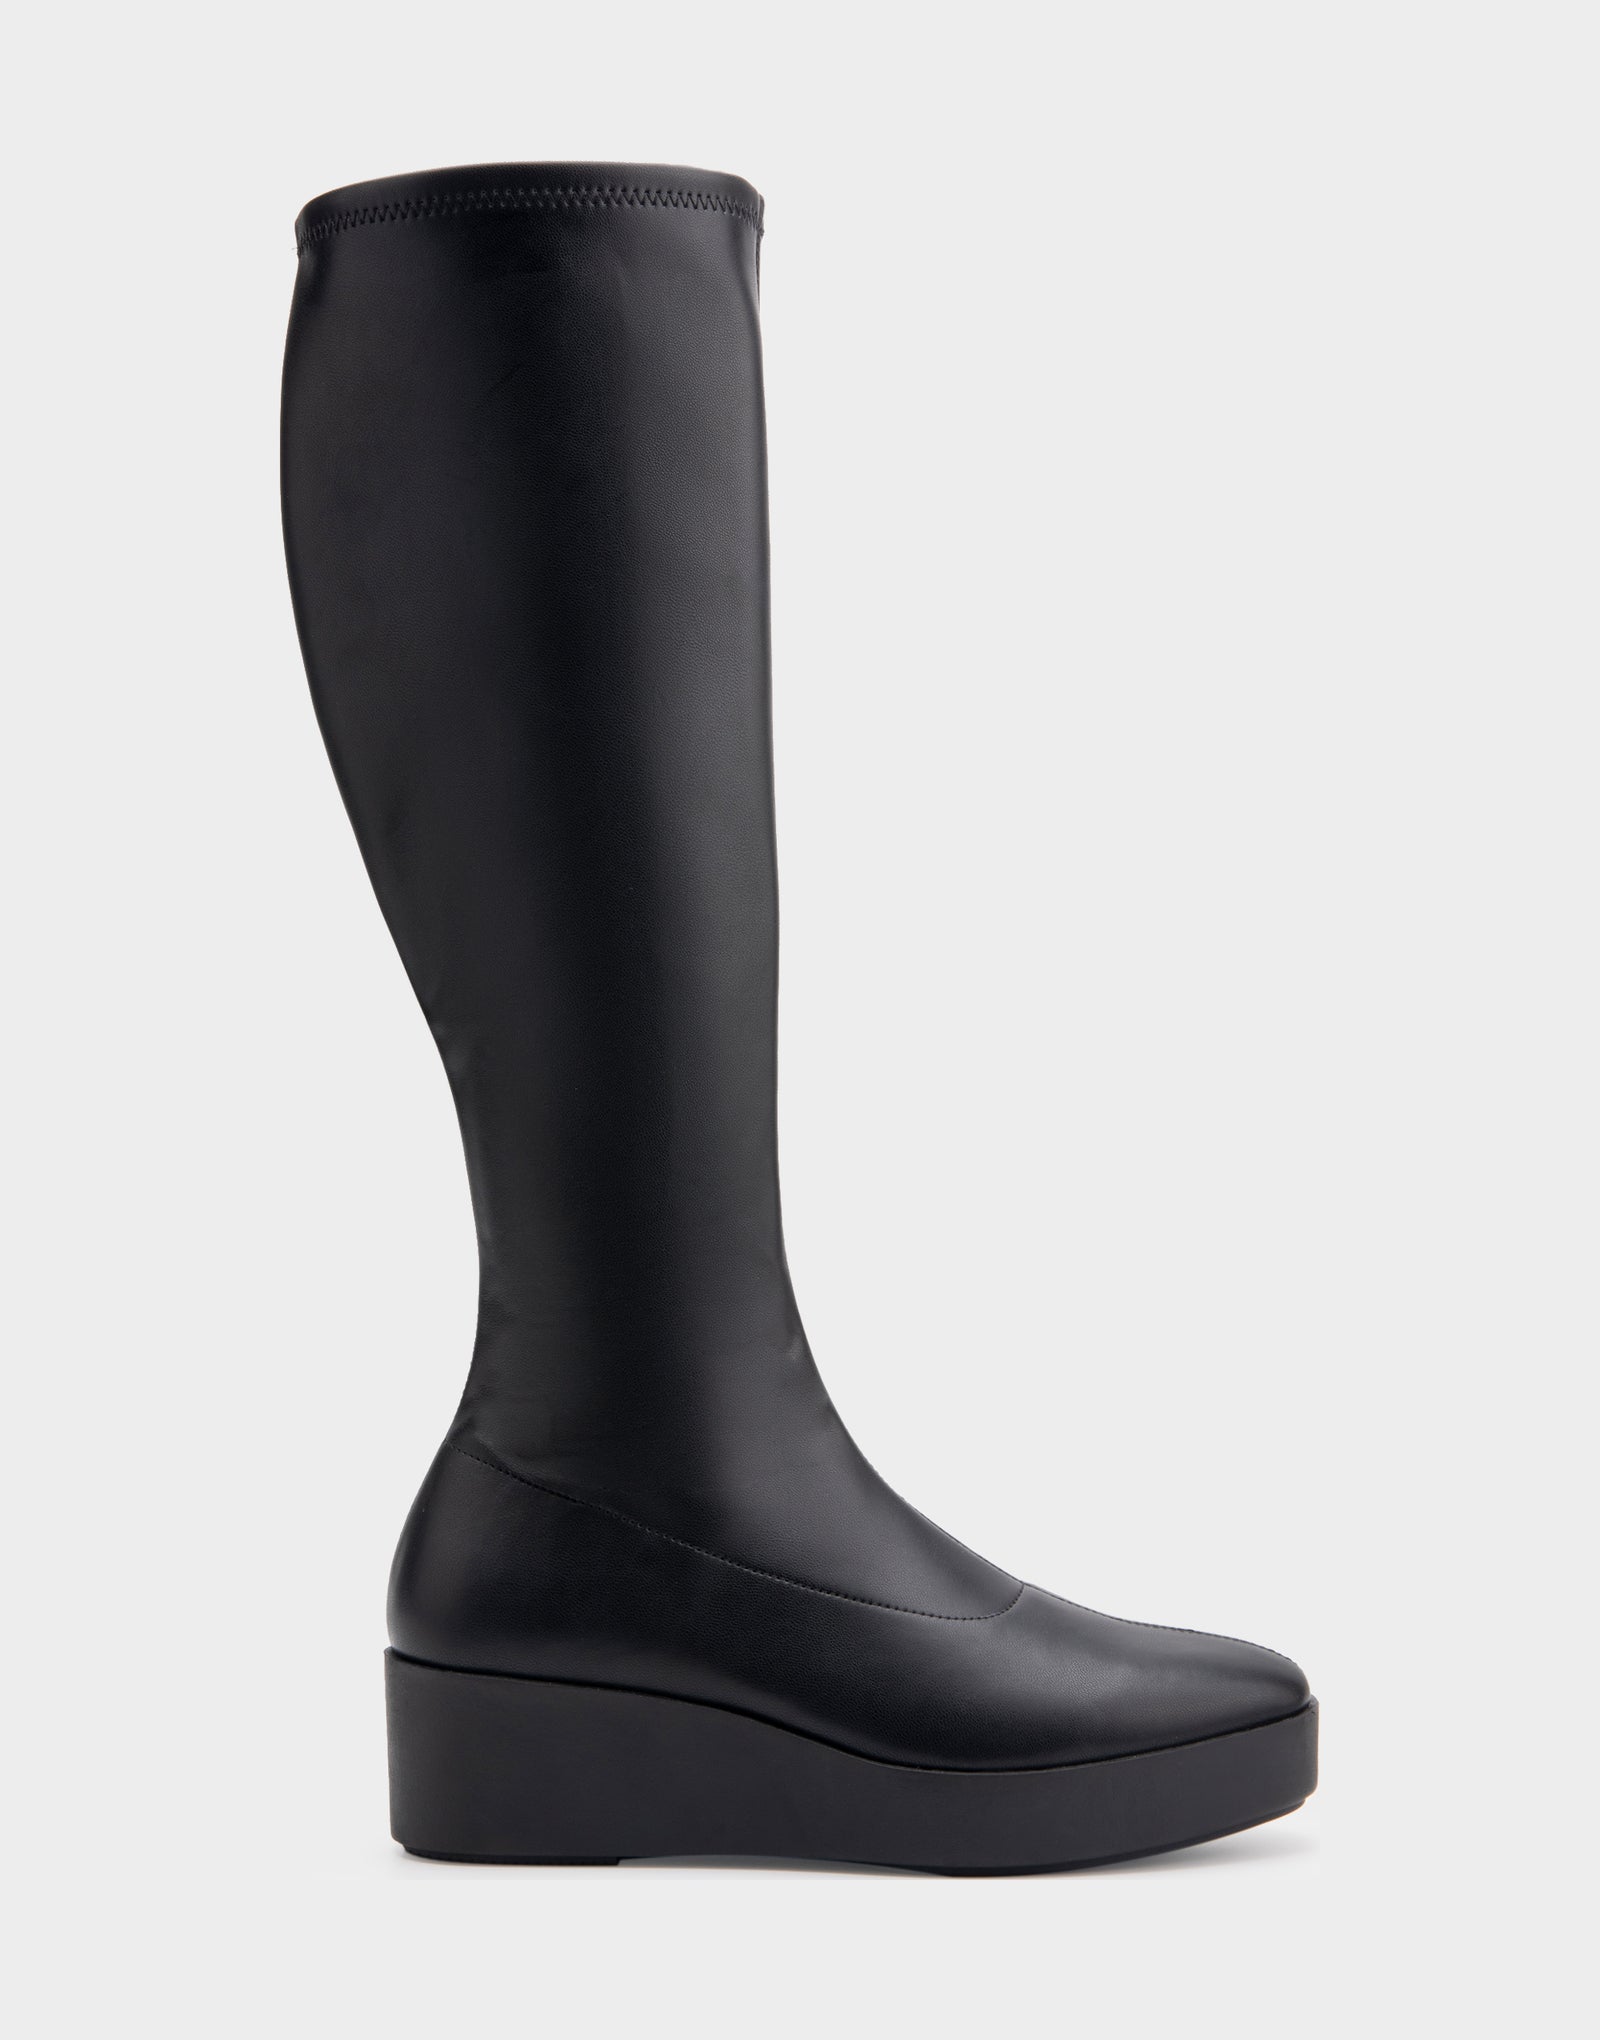 Knee-High Wedge Boot in Leather - Black - Gifts for Her